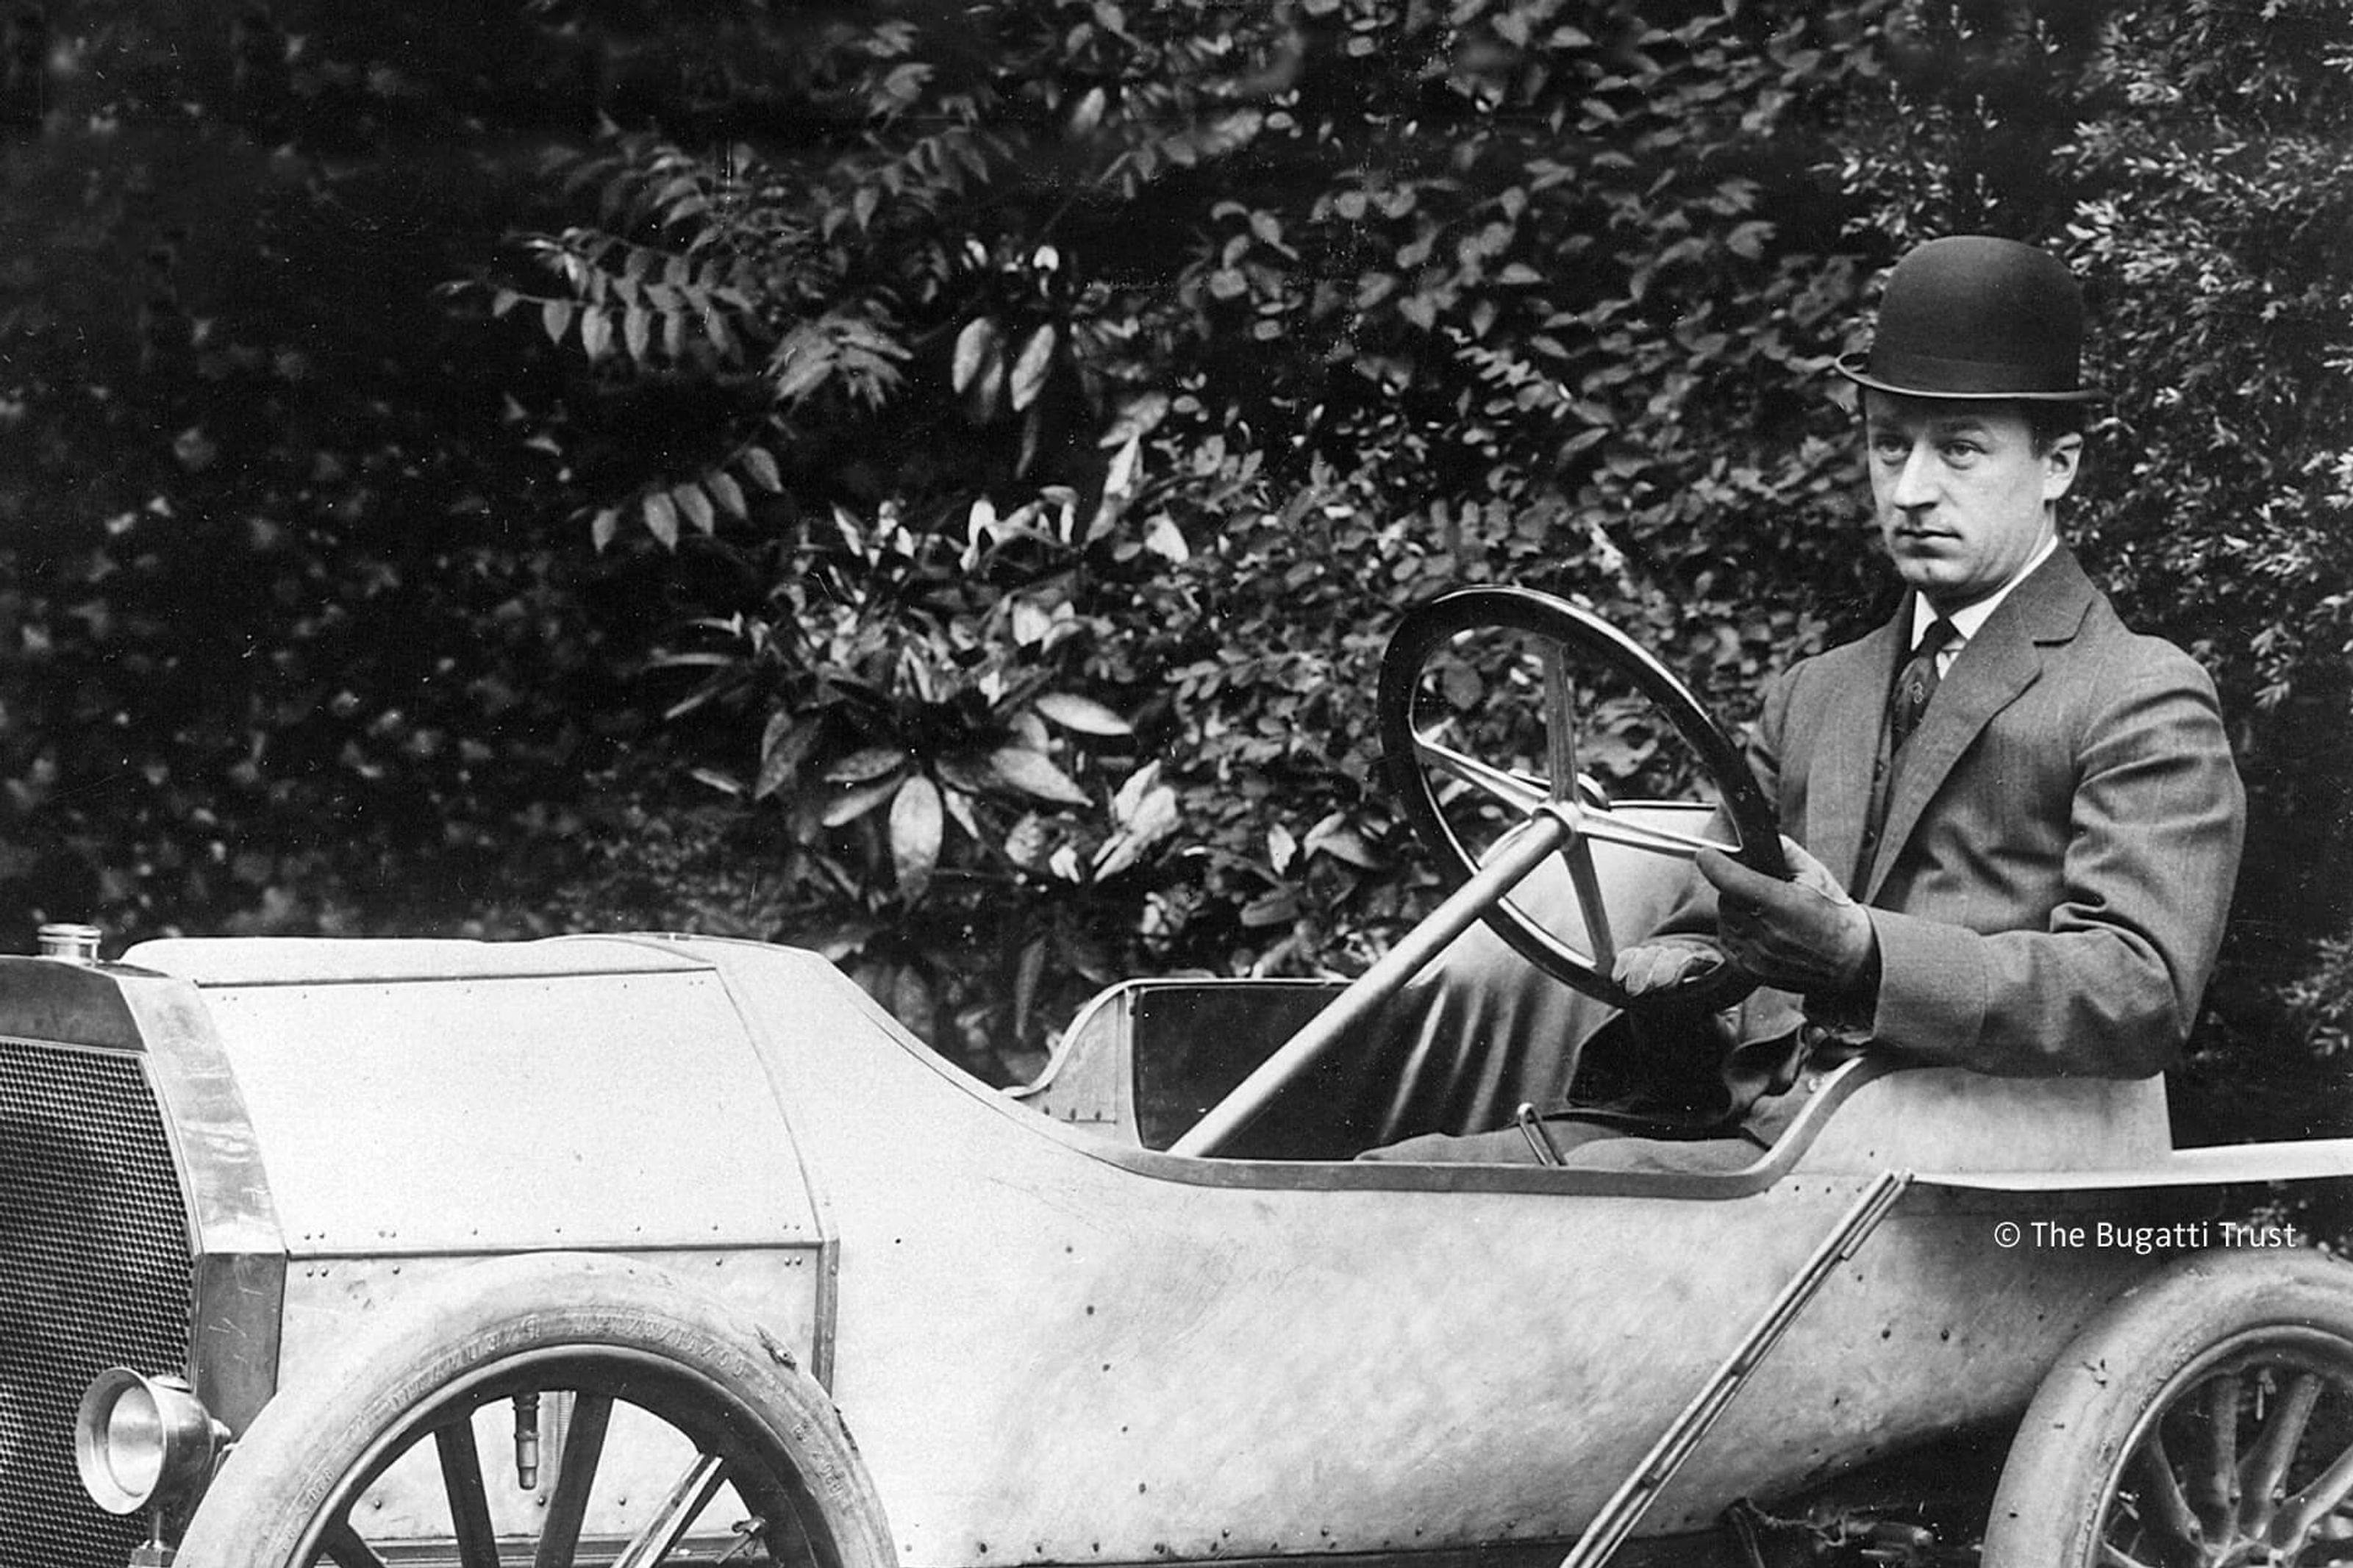 The Bugatti Type 10: Ettore’s first car – how everything began